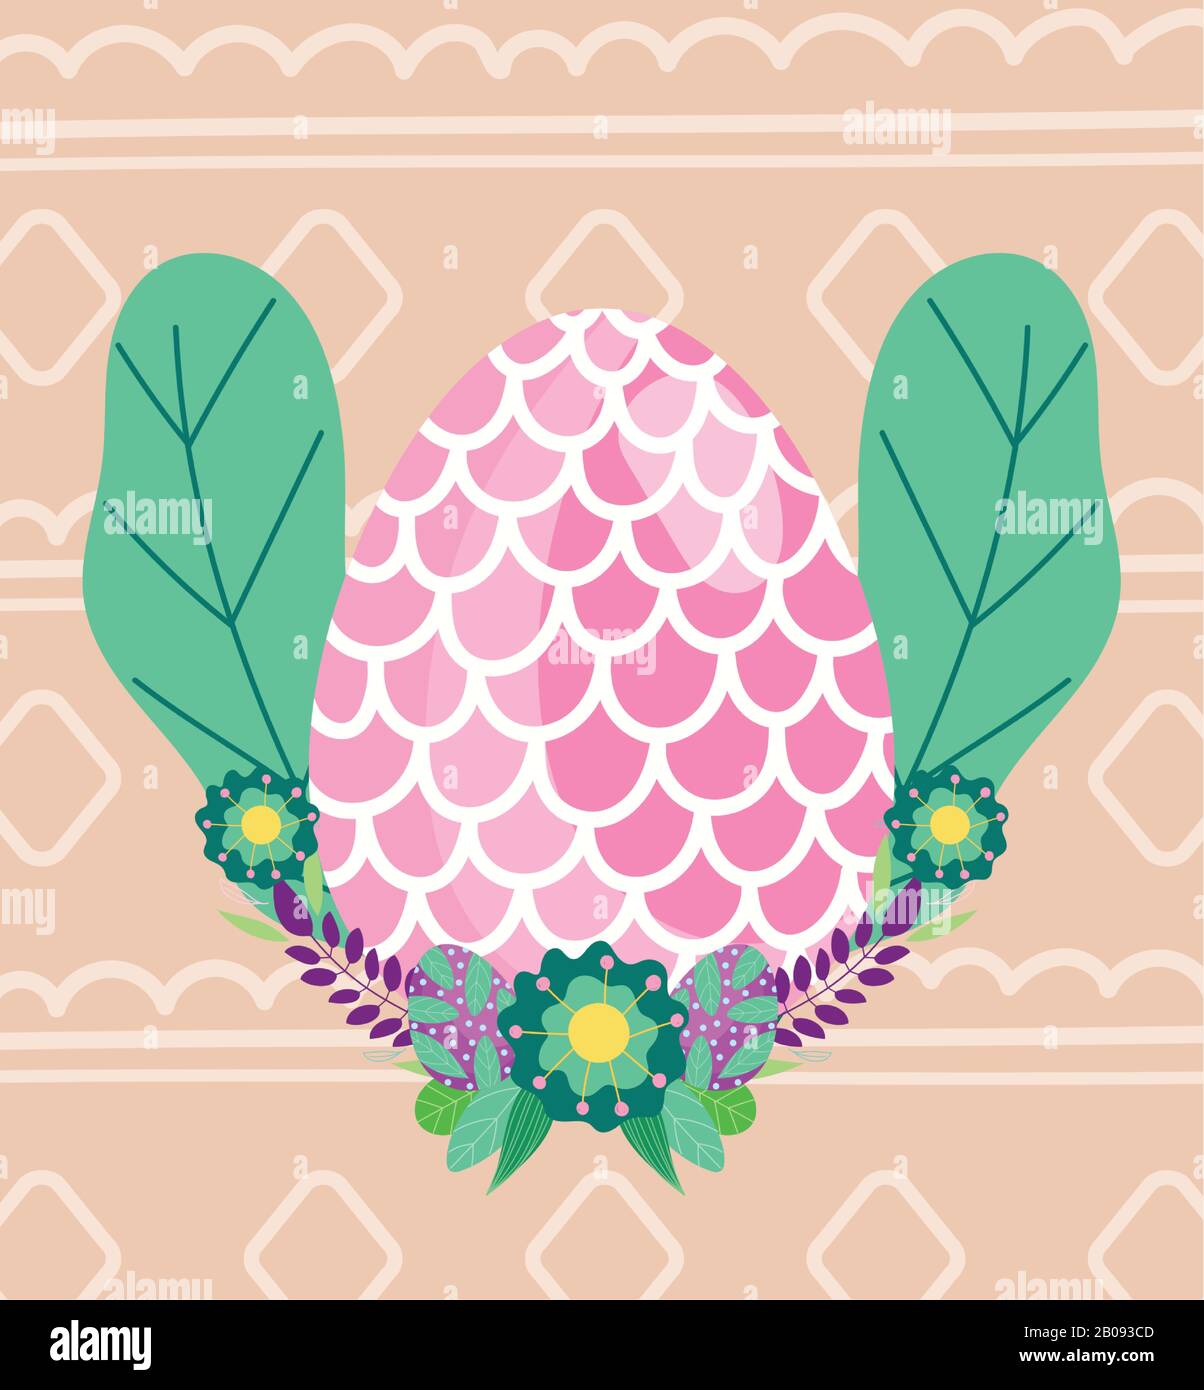 https://c8.alamy.com/comp/2B093CD/happy-easter-egg-decorated-with-shape-of-fish-scales-flowers-color-background-vector-illustration-2B093CD.jpg